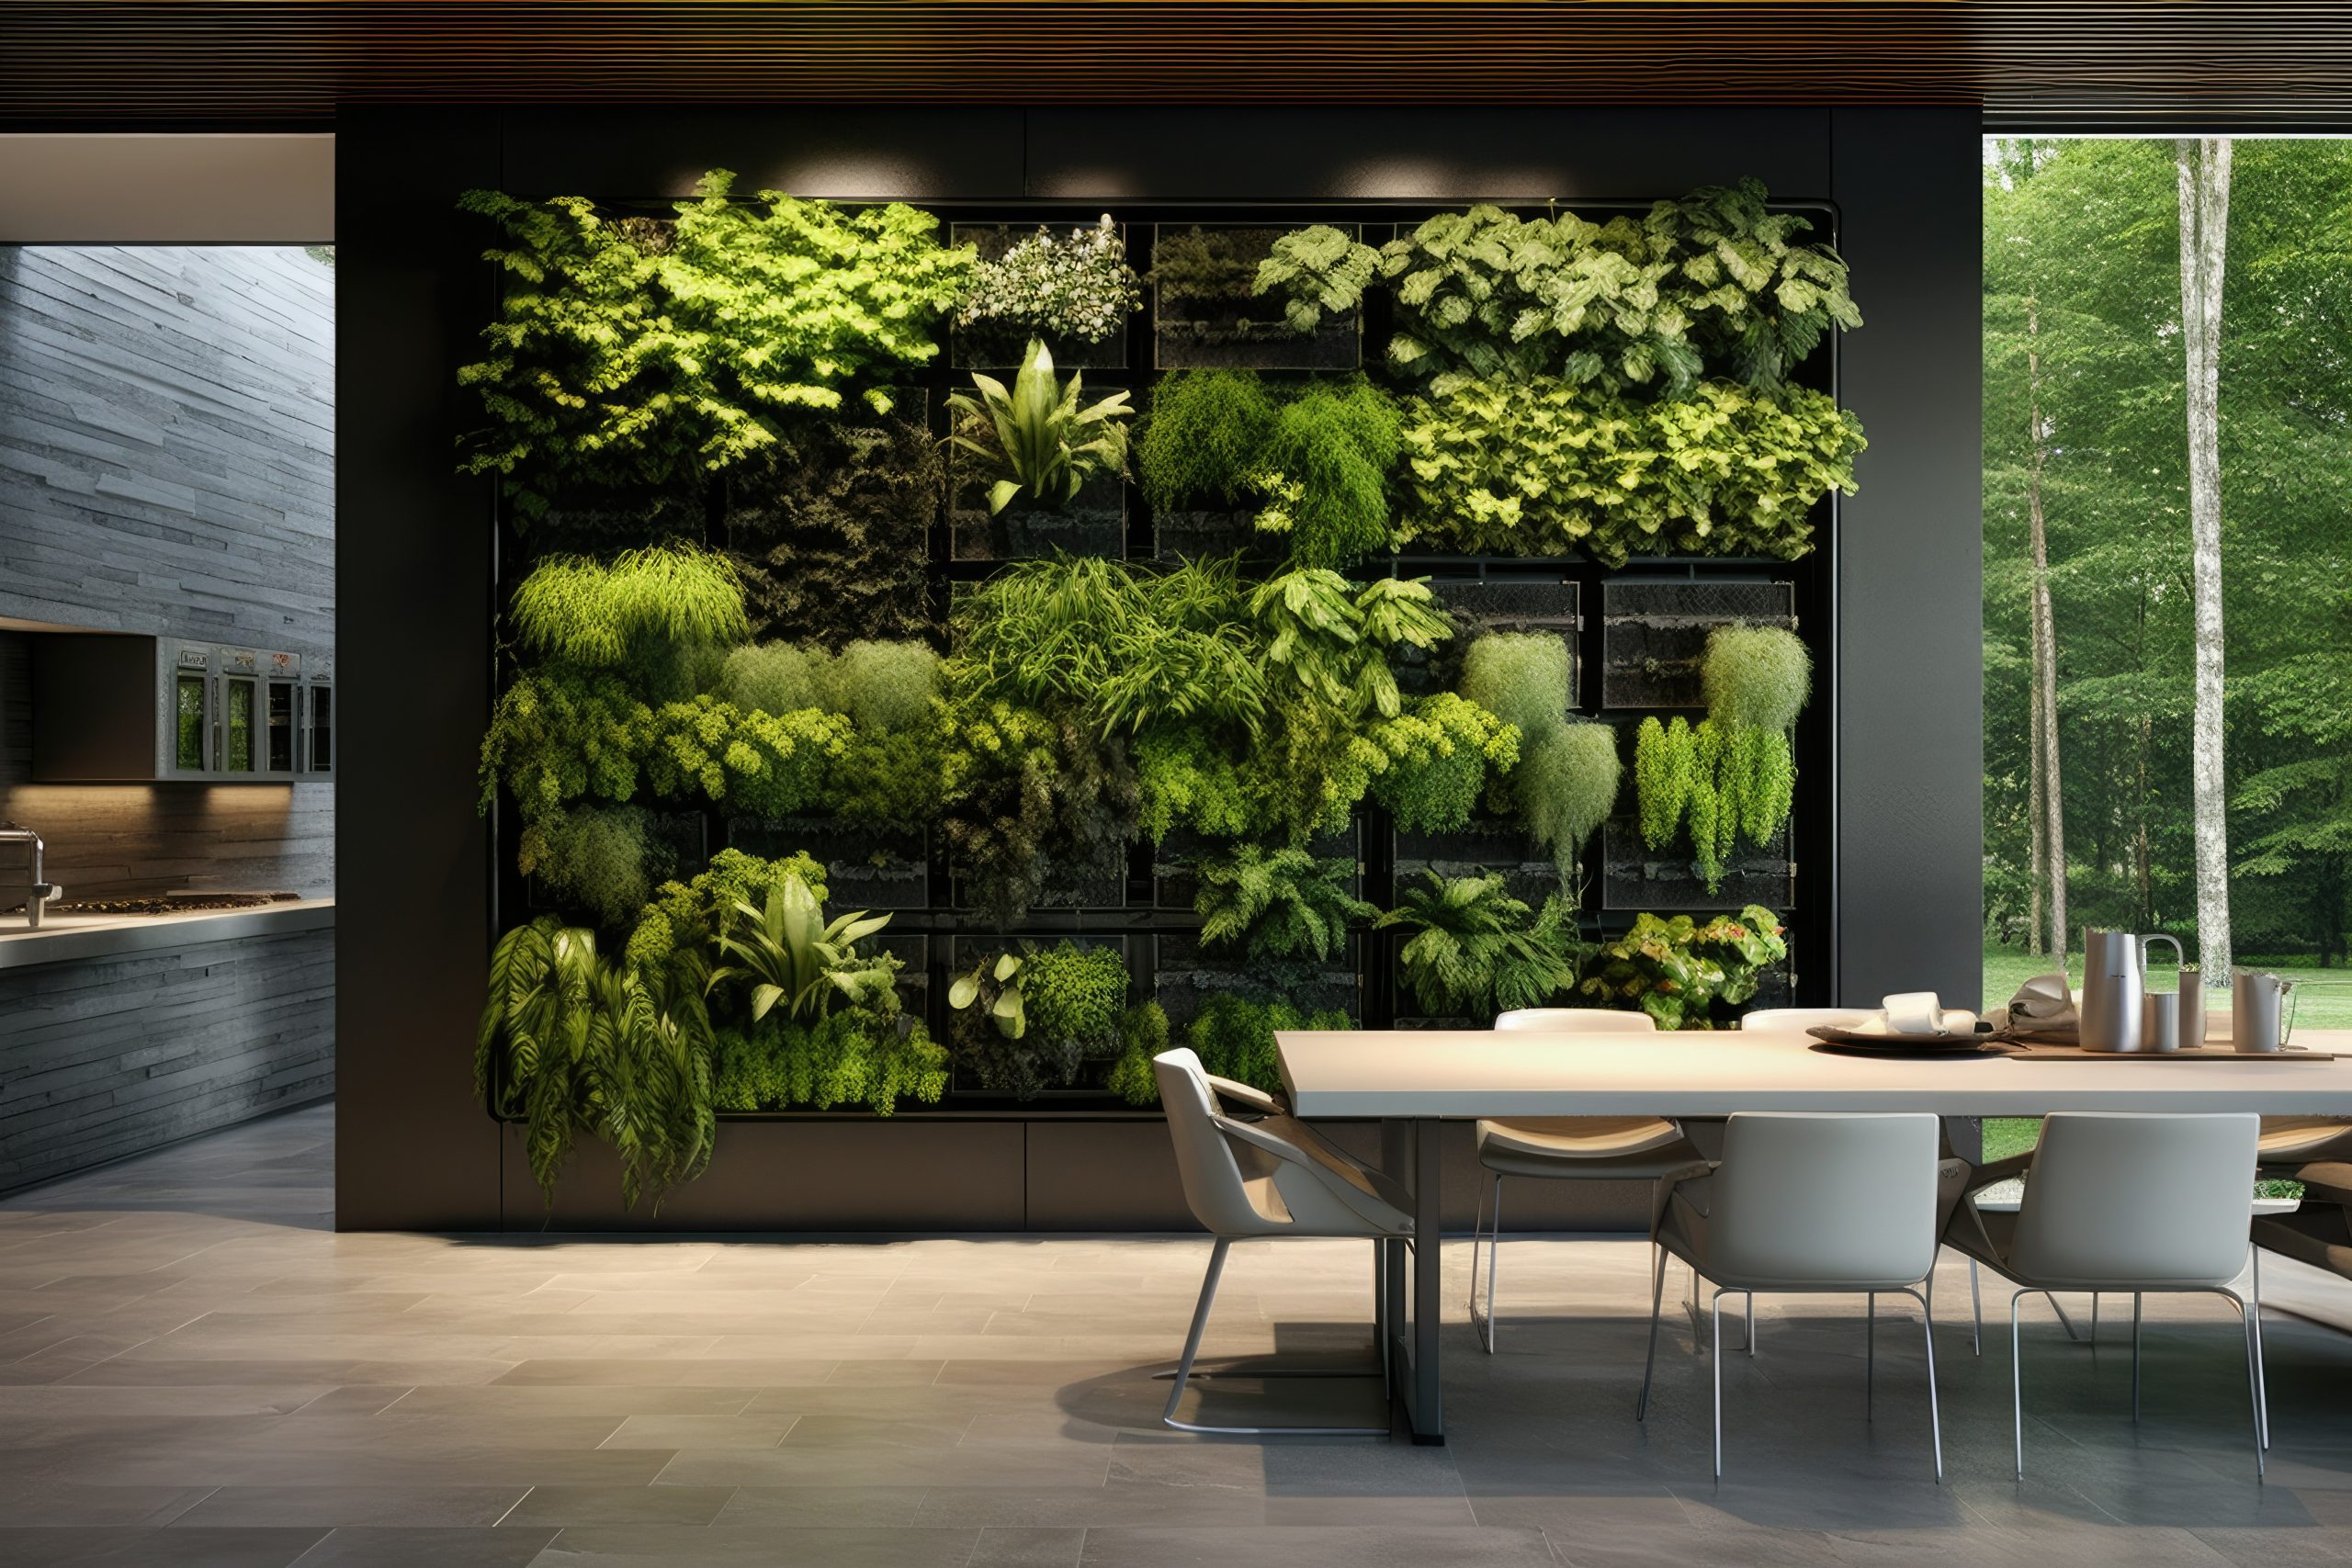 2024 home design trends: Eco-friendly home interior design with biophilic design elements. Modern living room interior biophilic design with vertical garden wall